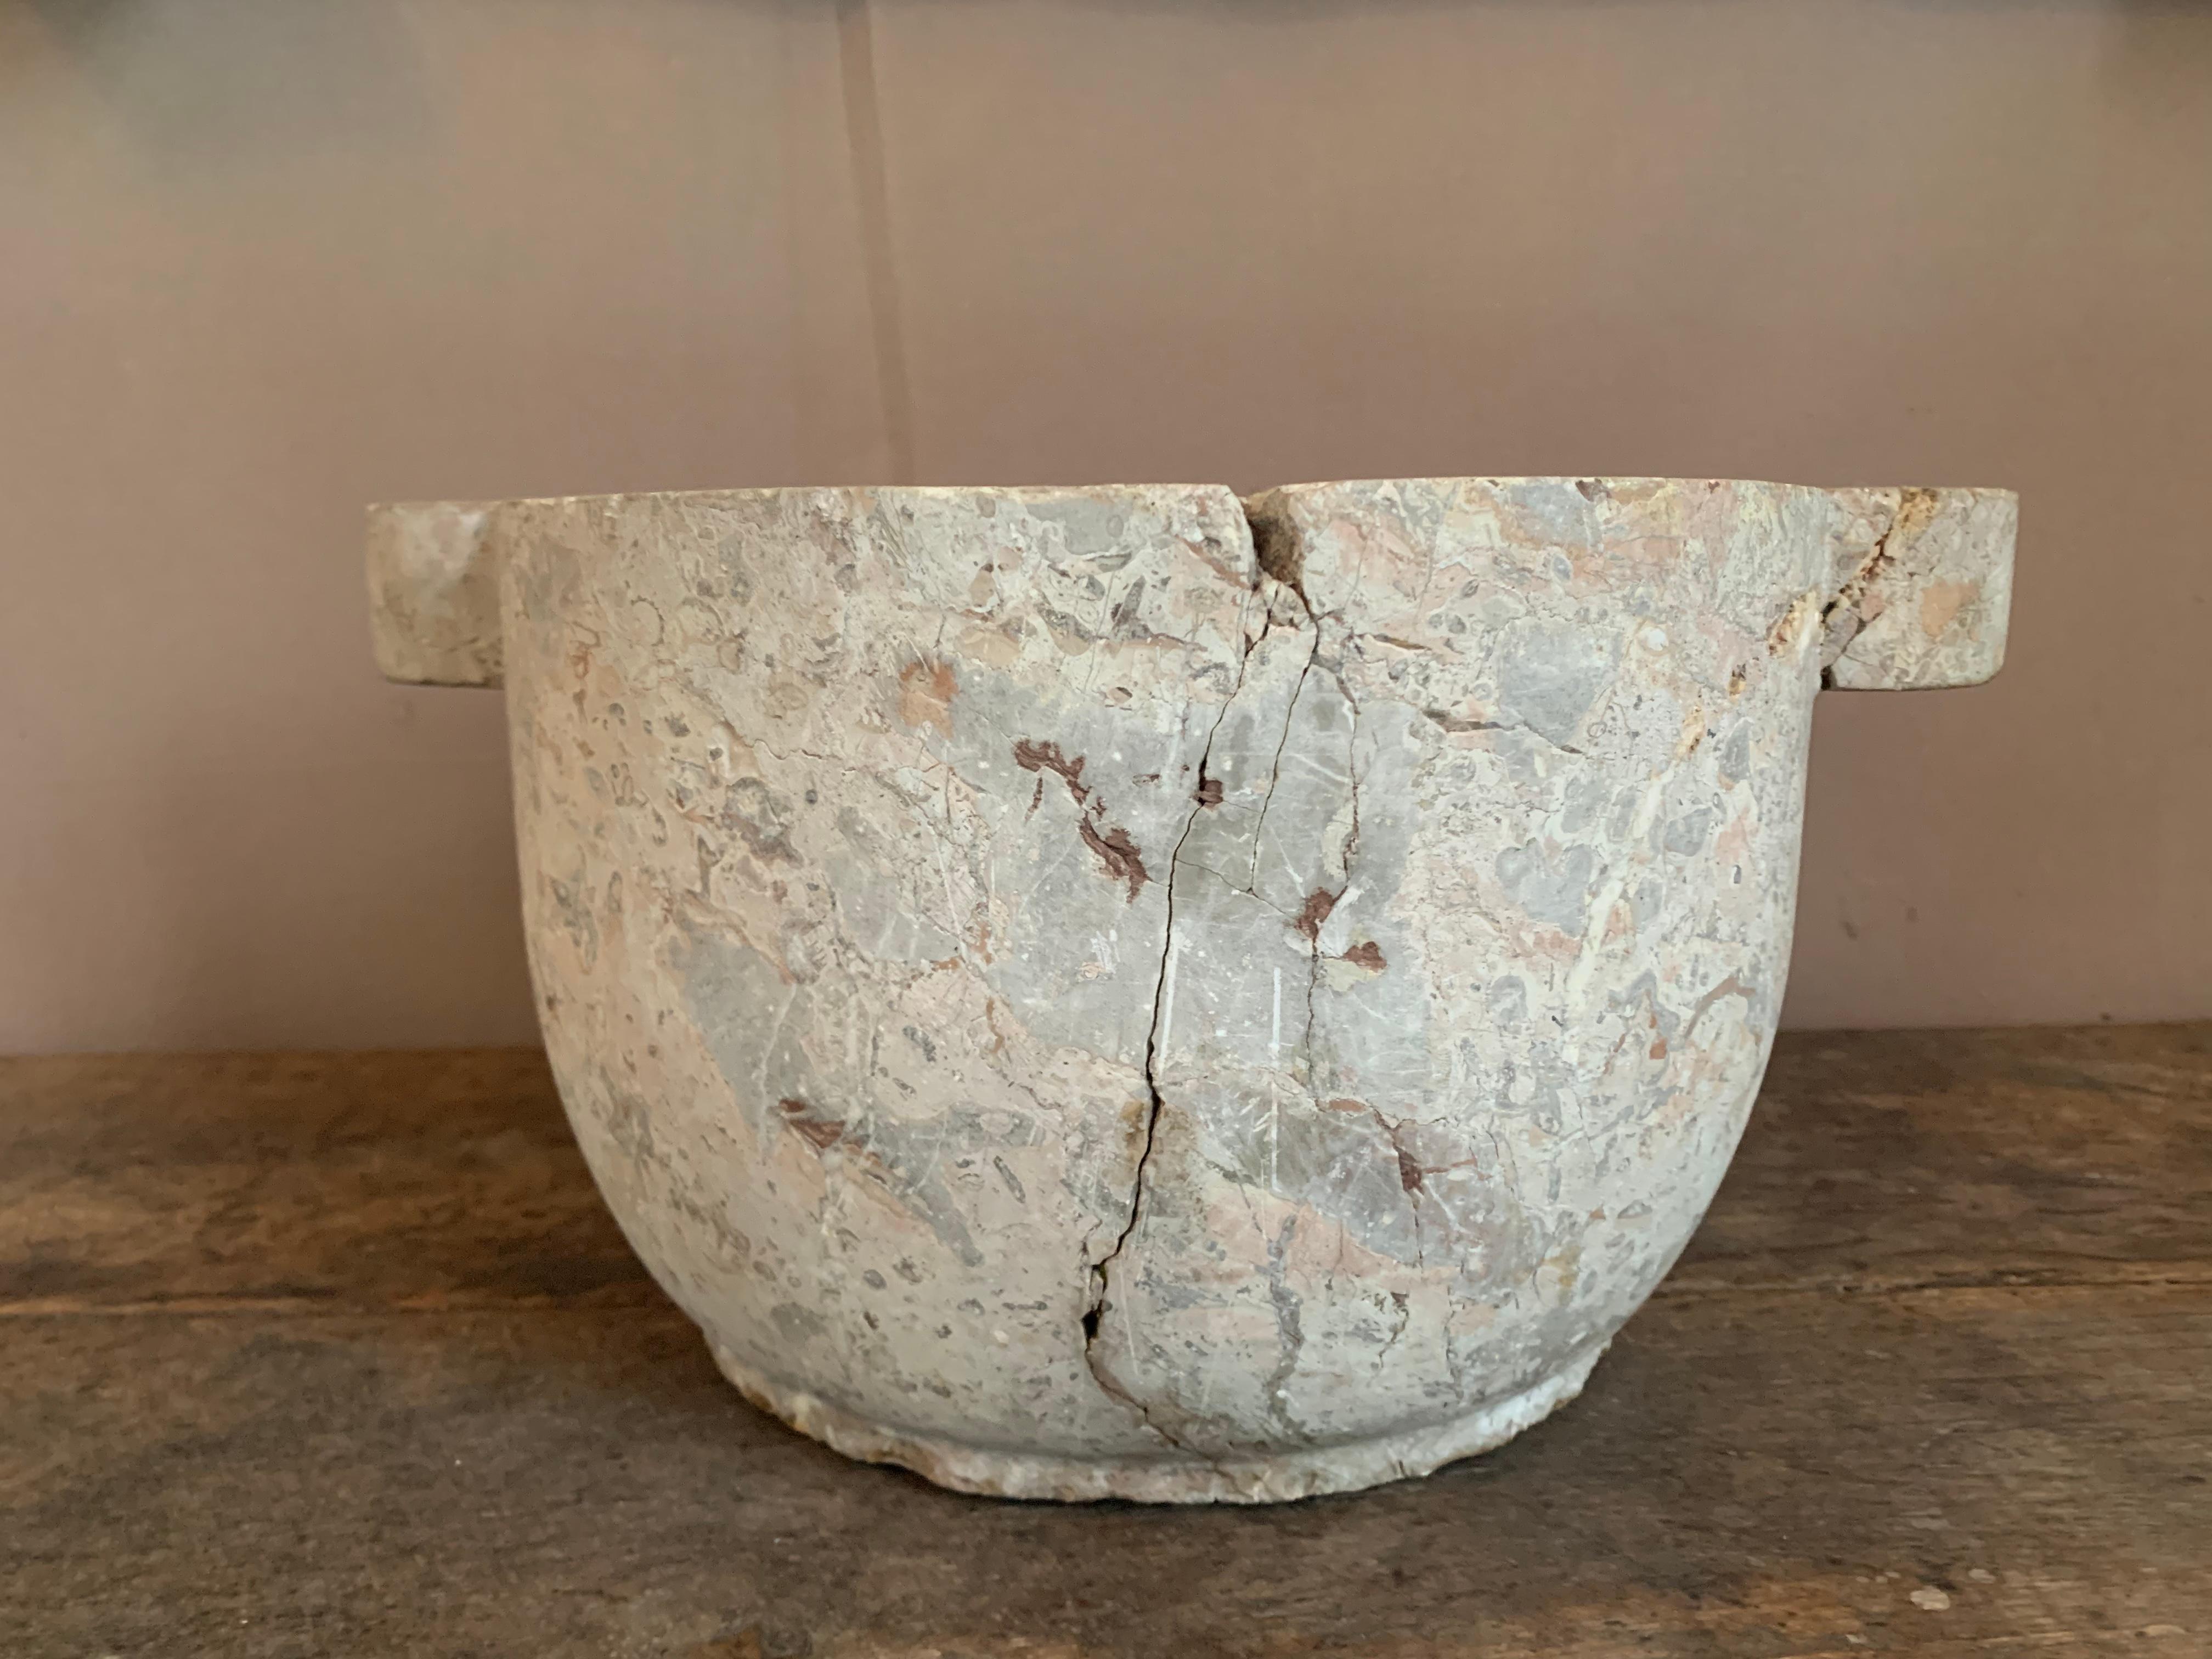 Antique large marble mortar of the high period. Dating from the late Middle Ages, early Renaissance. This mortar is made of grey marble.
The mortar was once used to grind different materials for food or medicine.